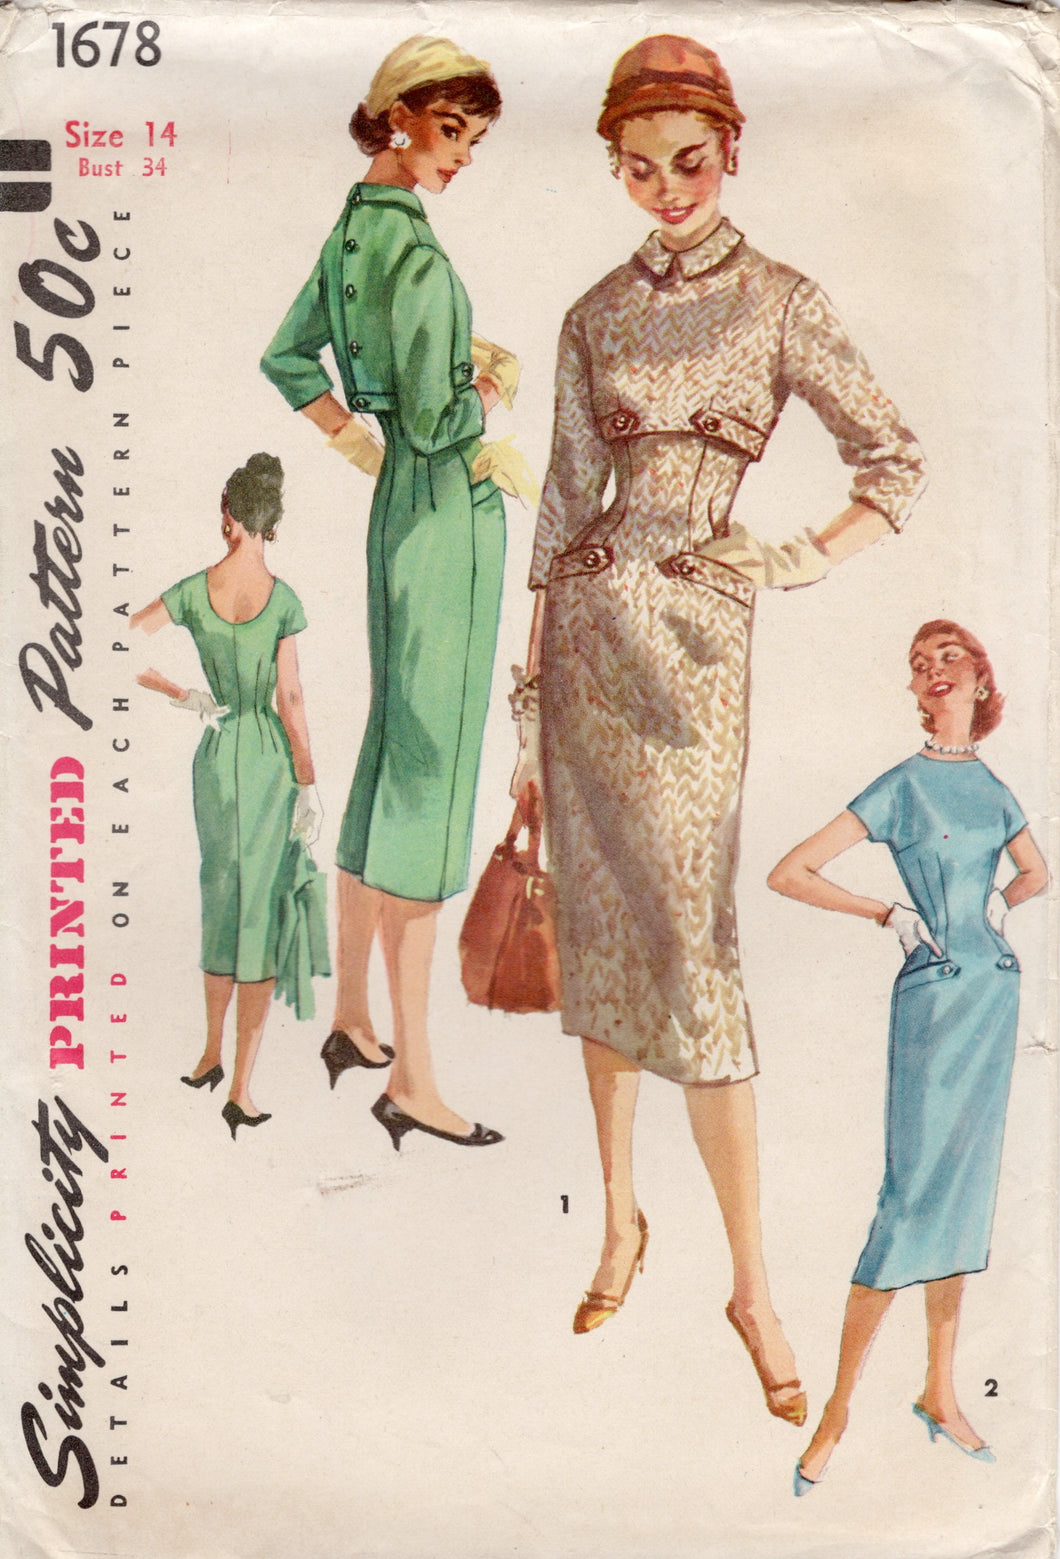 1950's Simplicity Sheath Dress and Jacket with Tab Accents - Bust 34